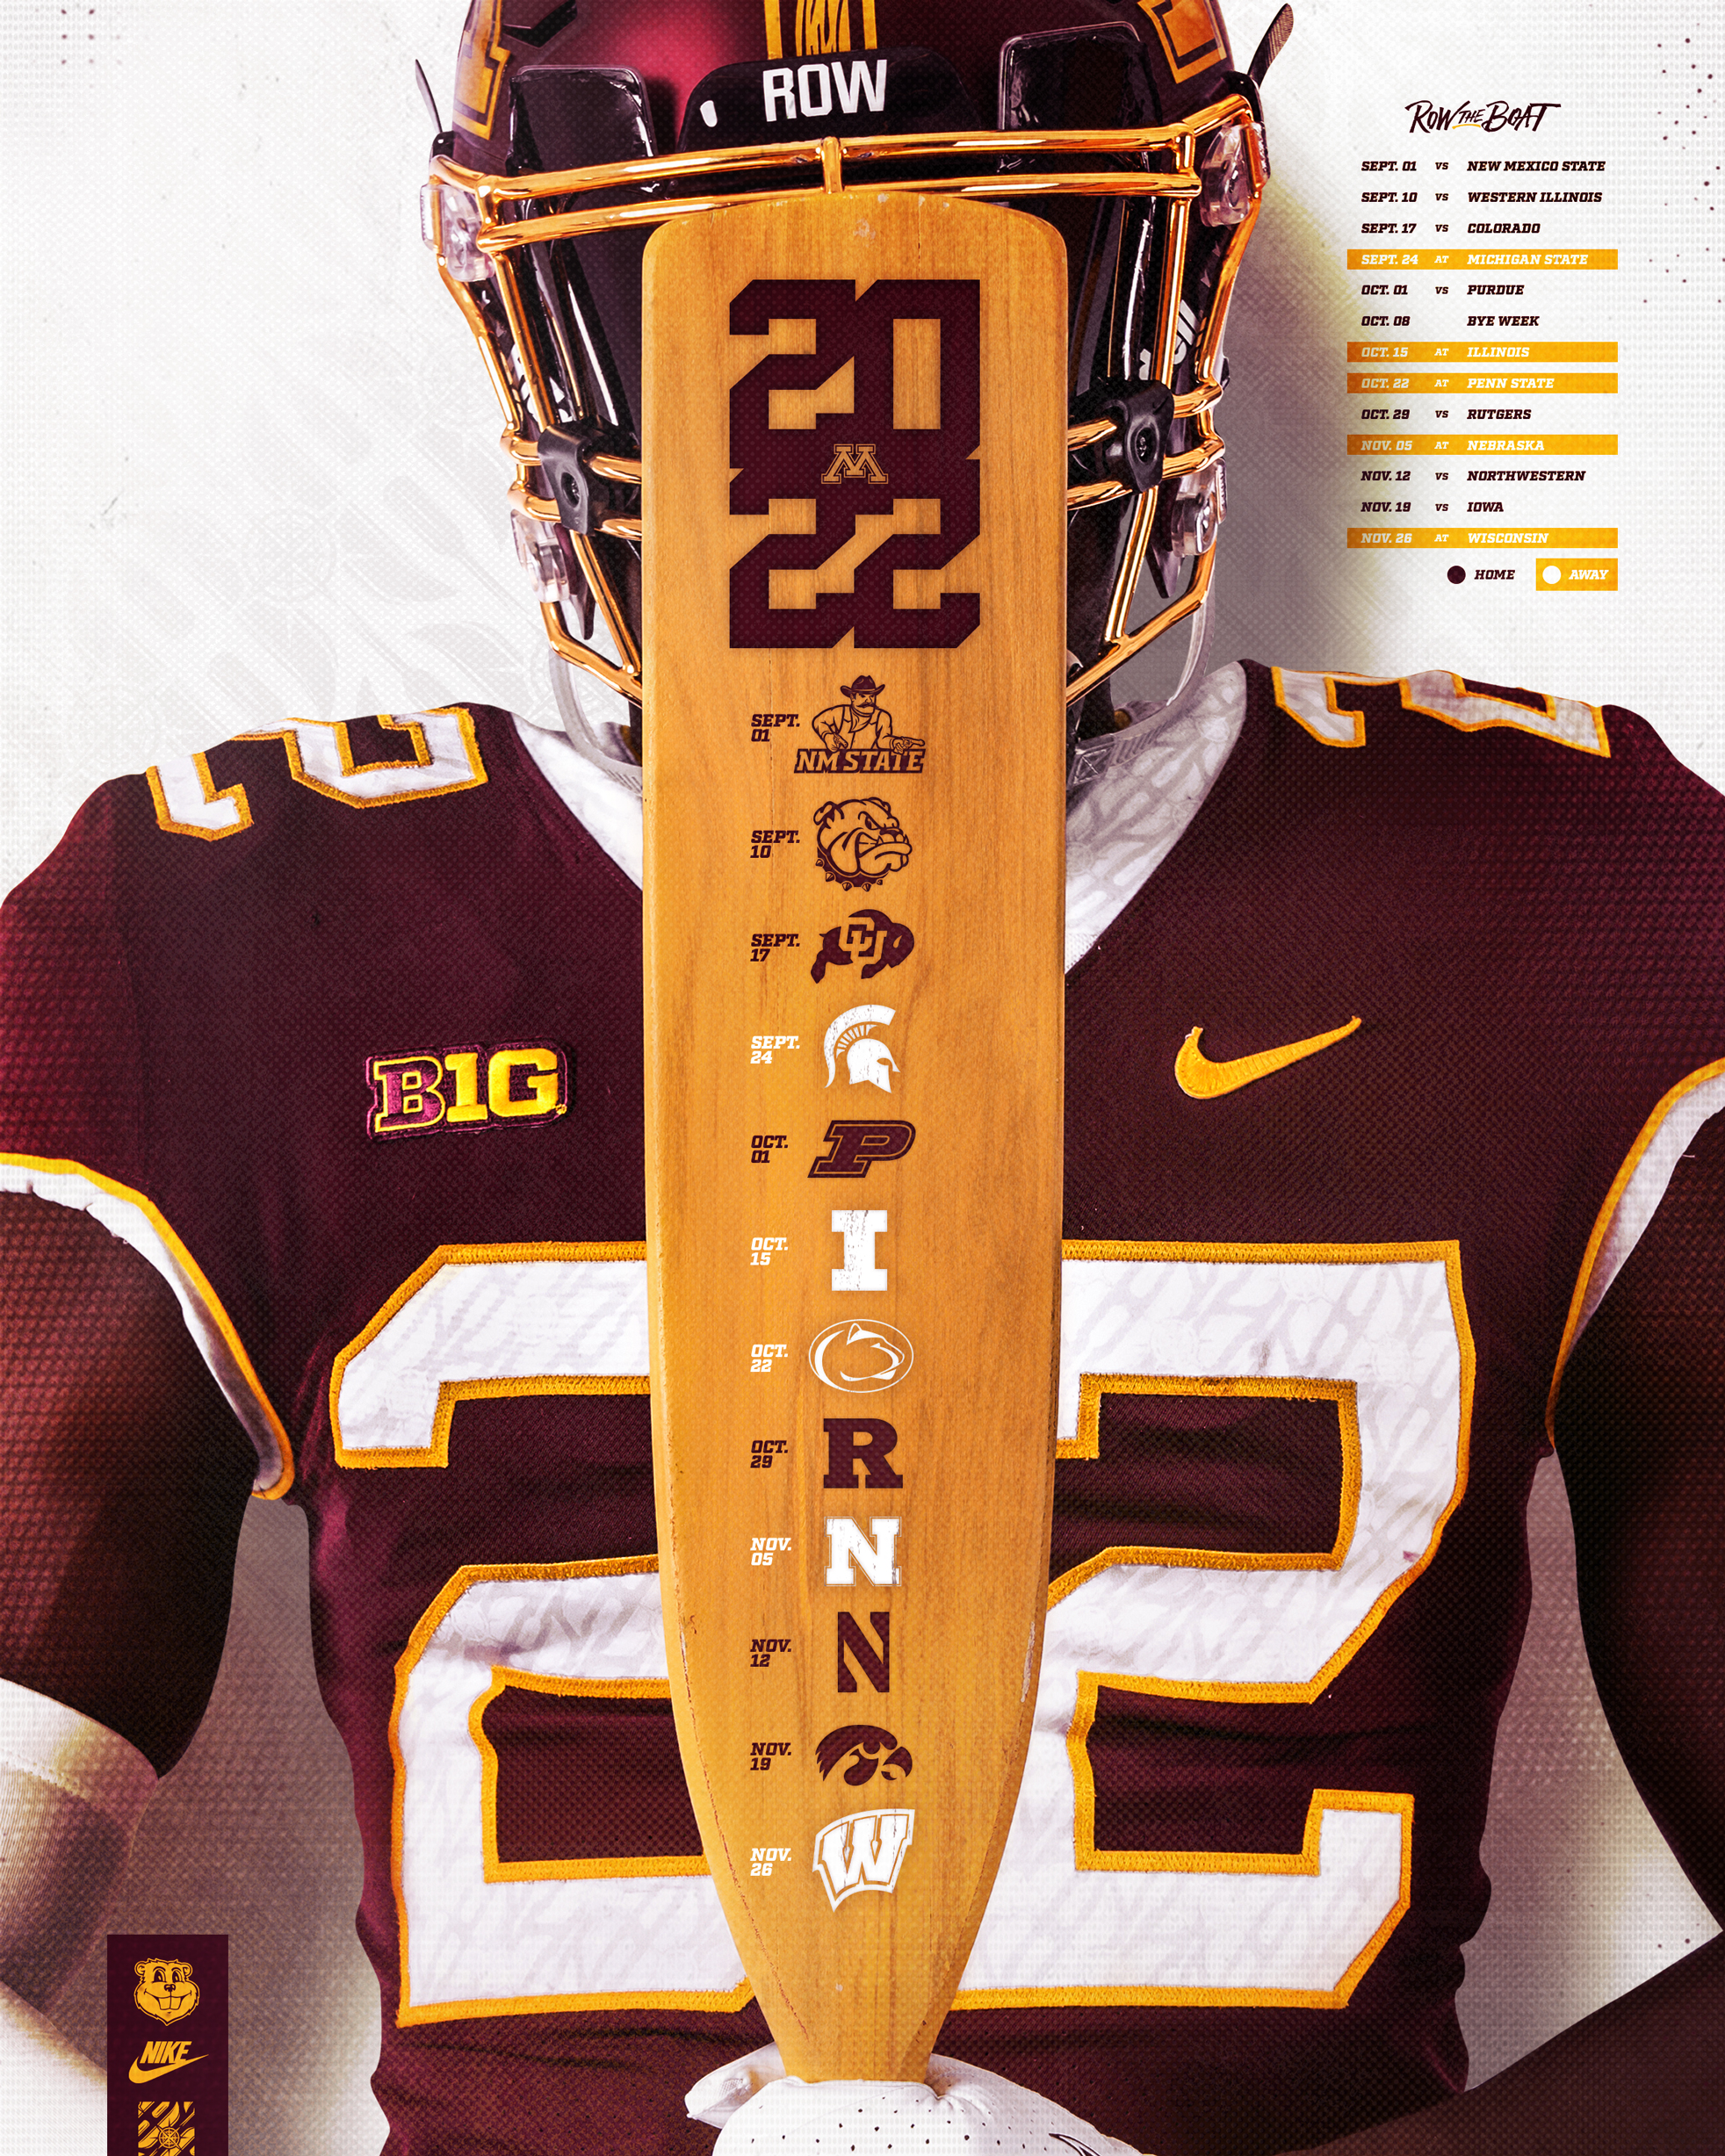 Mn Gophers Football Schedule 2022 Minnesota Football On Twitter: "The @Bigten Has Modified Minnesota's 2022  Schedule. New Schedule ⤵️ 🔗 Https://T.co/7Ngvn8Lhjq #Rtb // #Skiumah // # Gophers Https://T.co/Otu1Pieggw" / Twitter